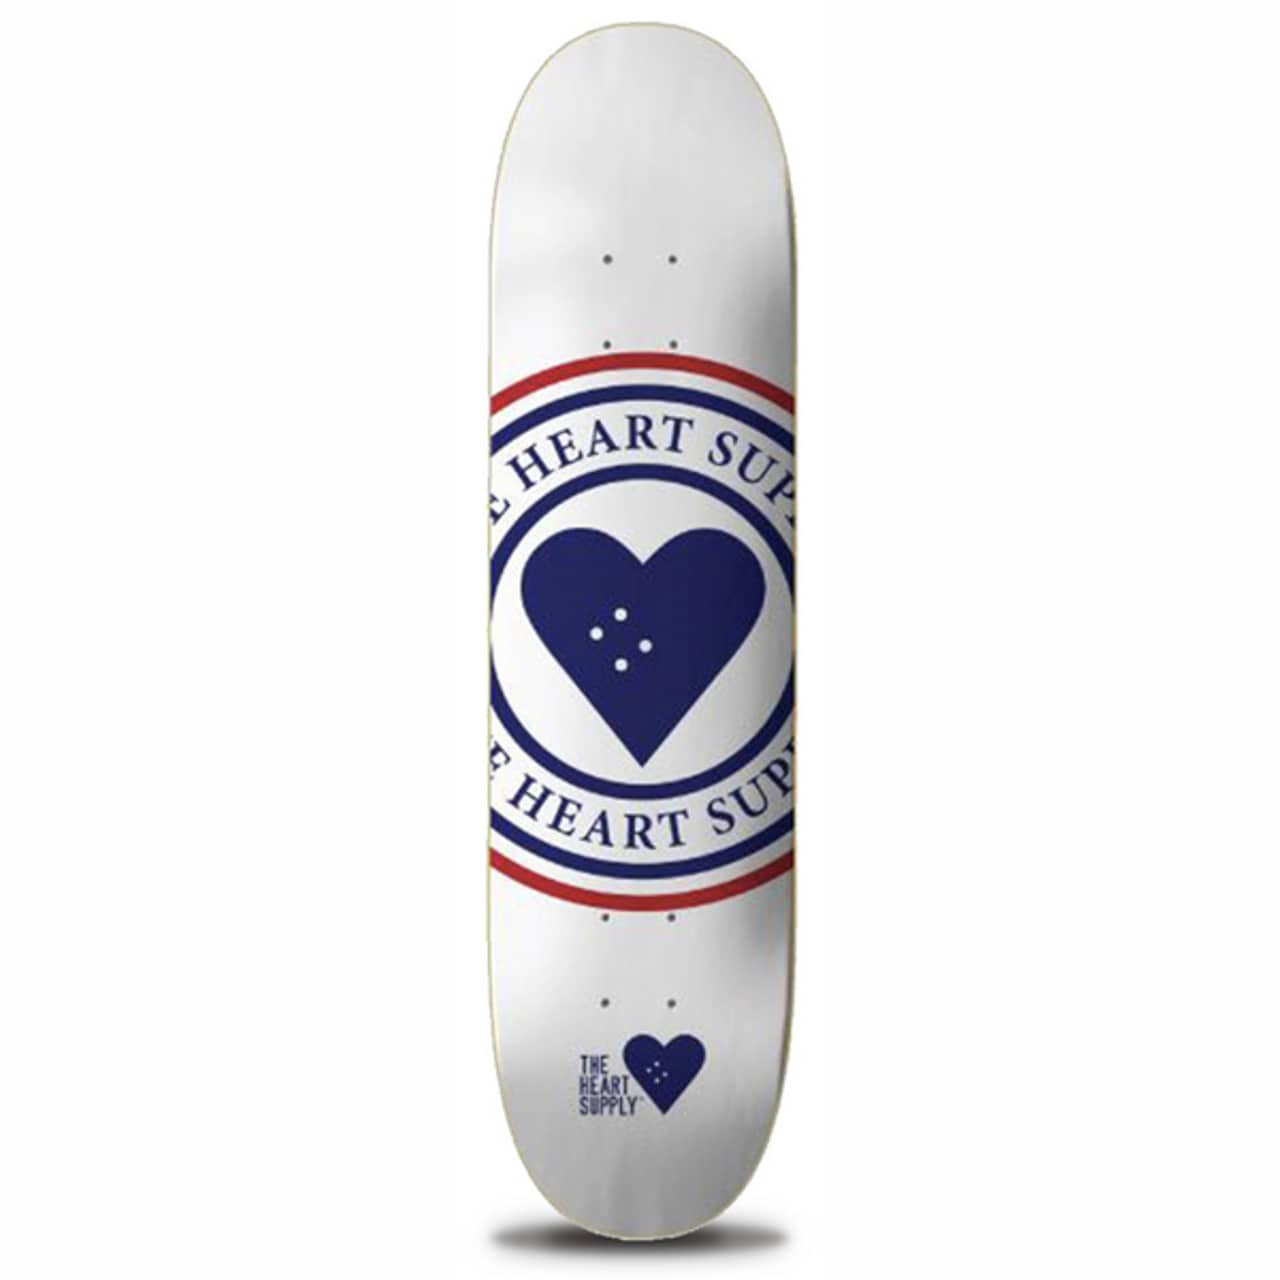 The Heart Supply Insignia White 8 25 deck